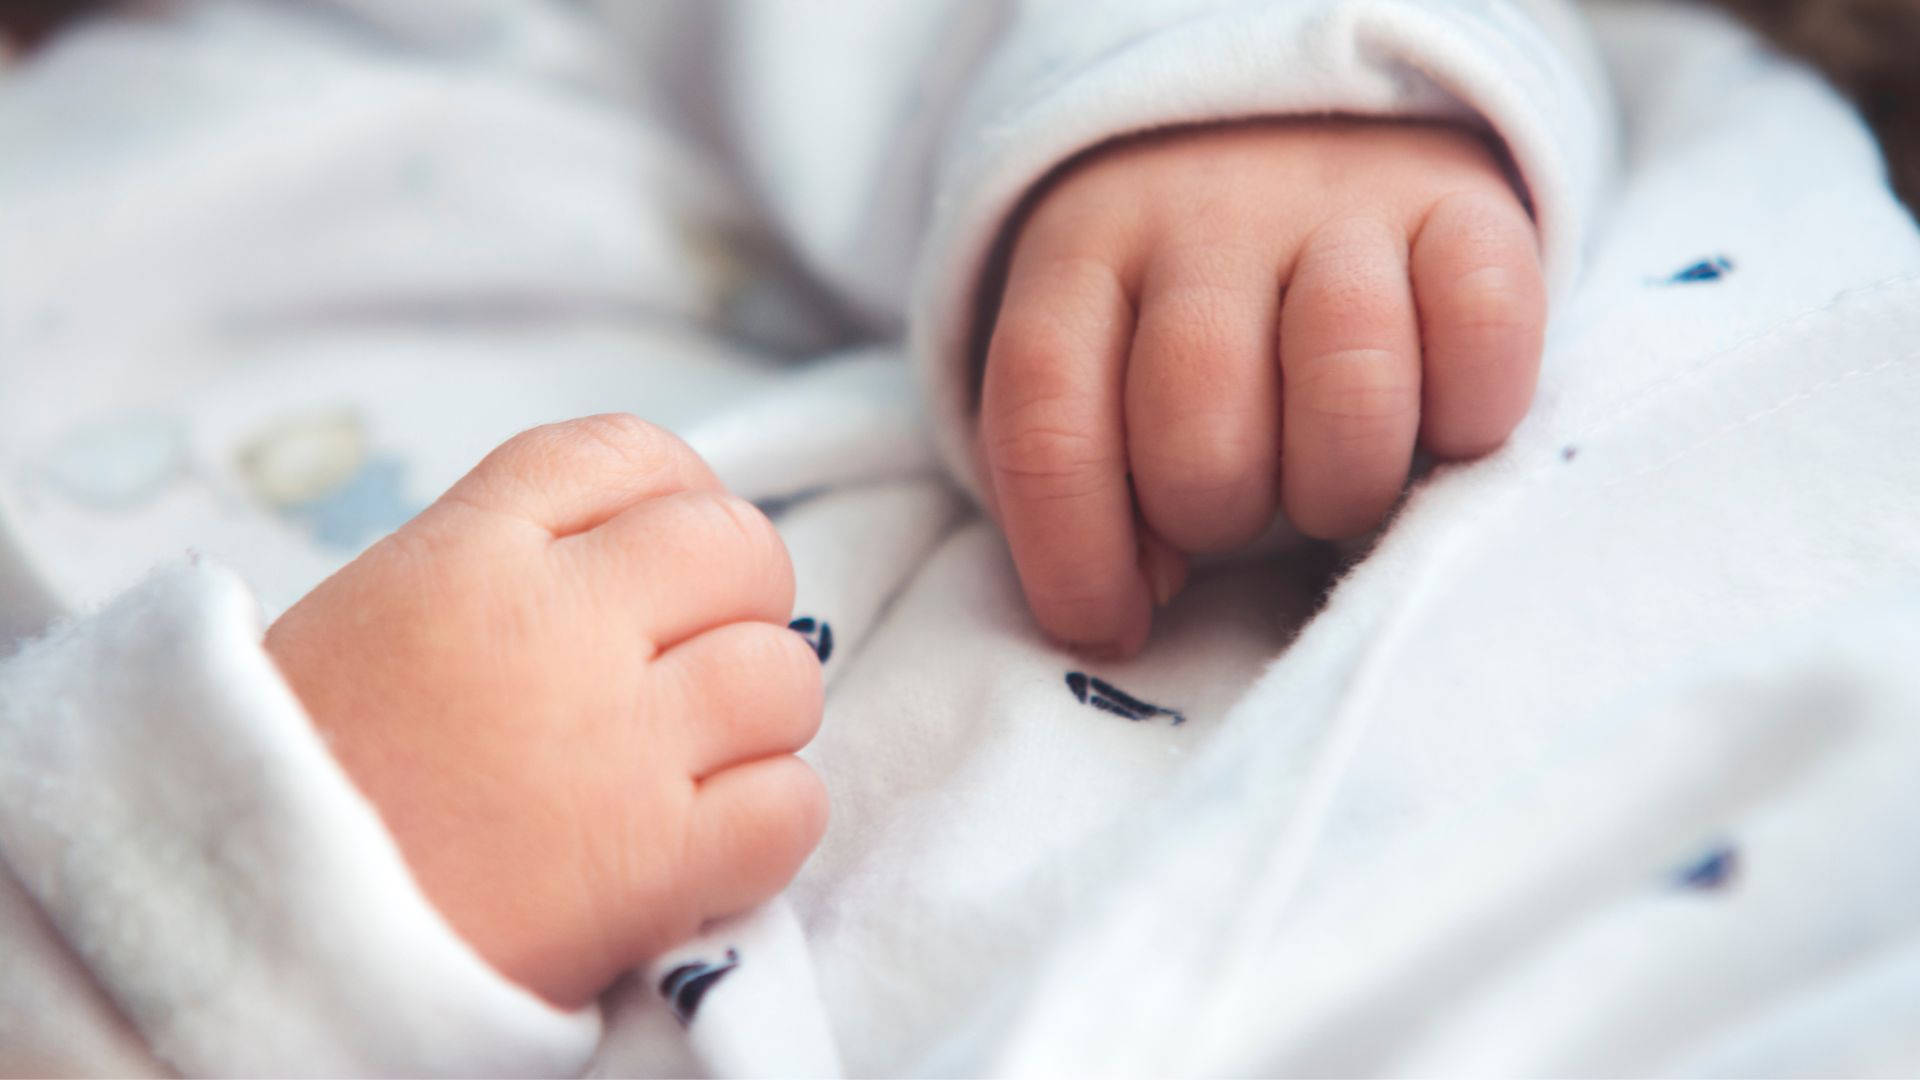 Baby Hands Wearing White Outfit Wallpaper